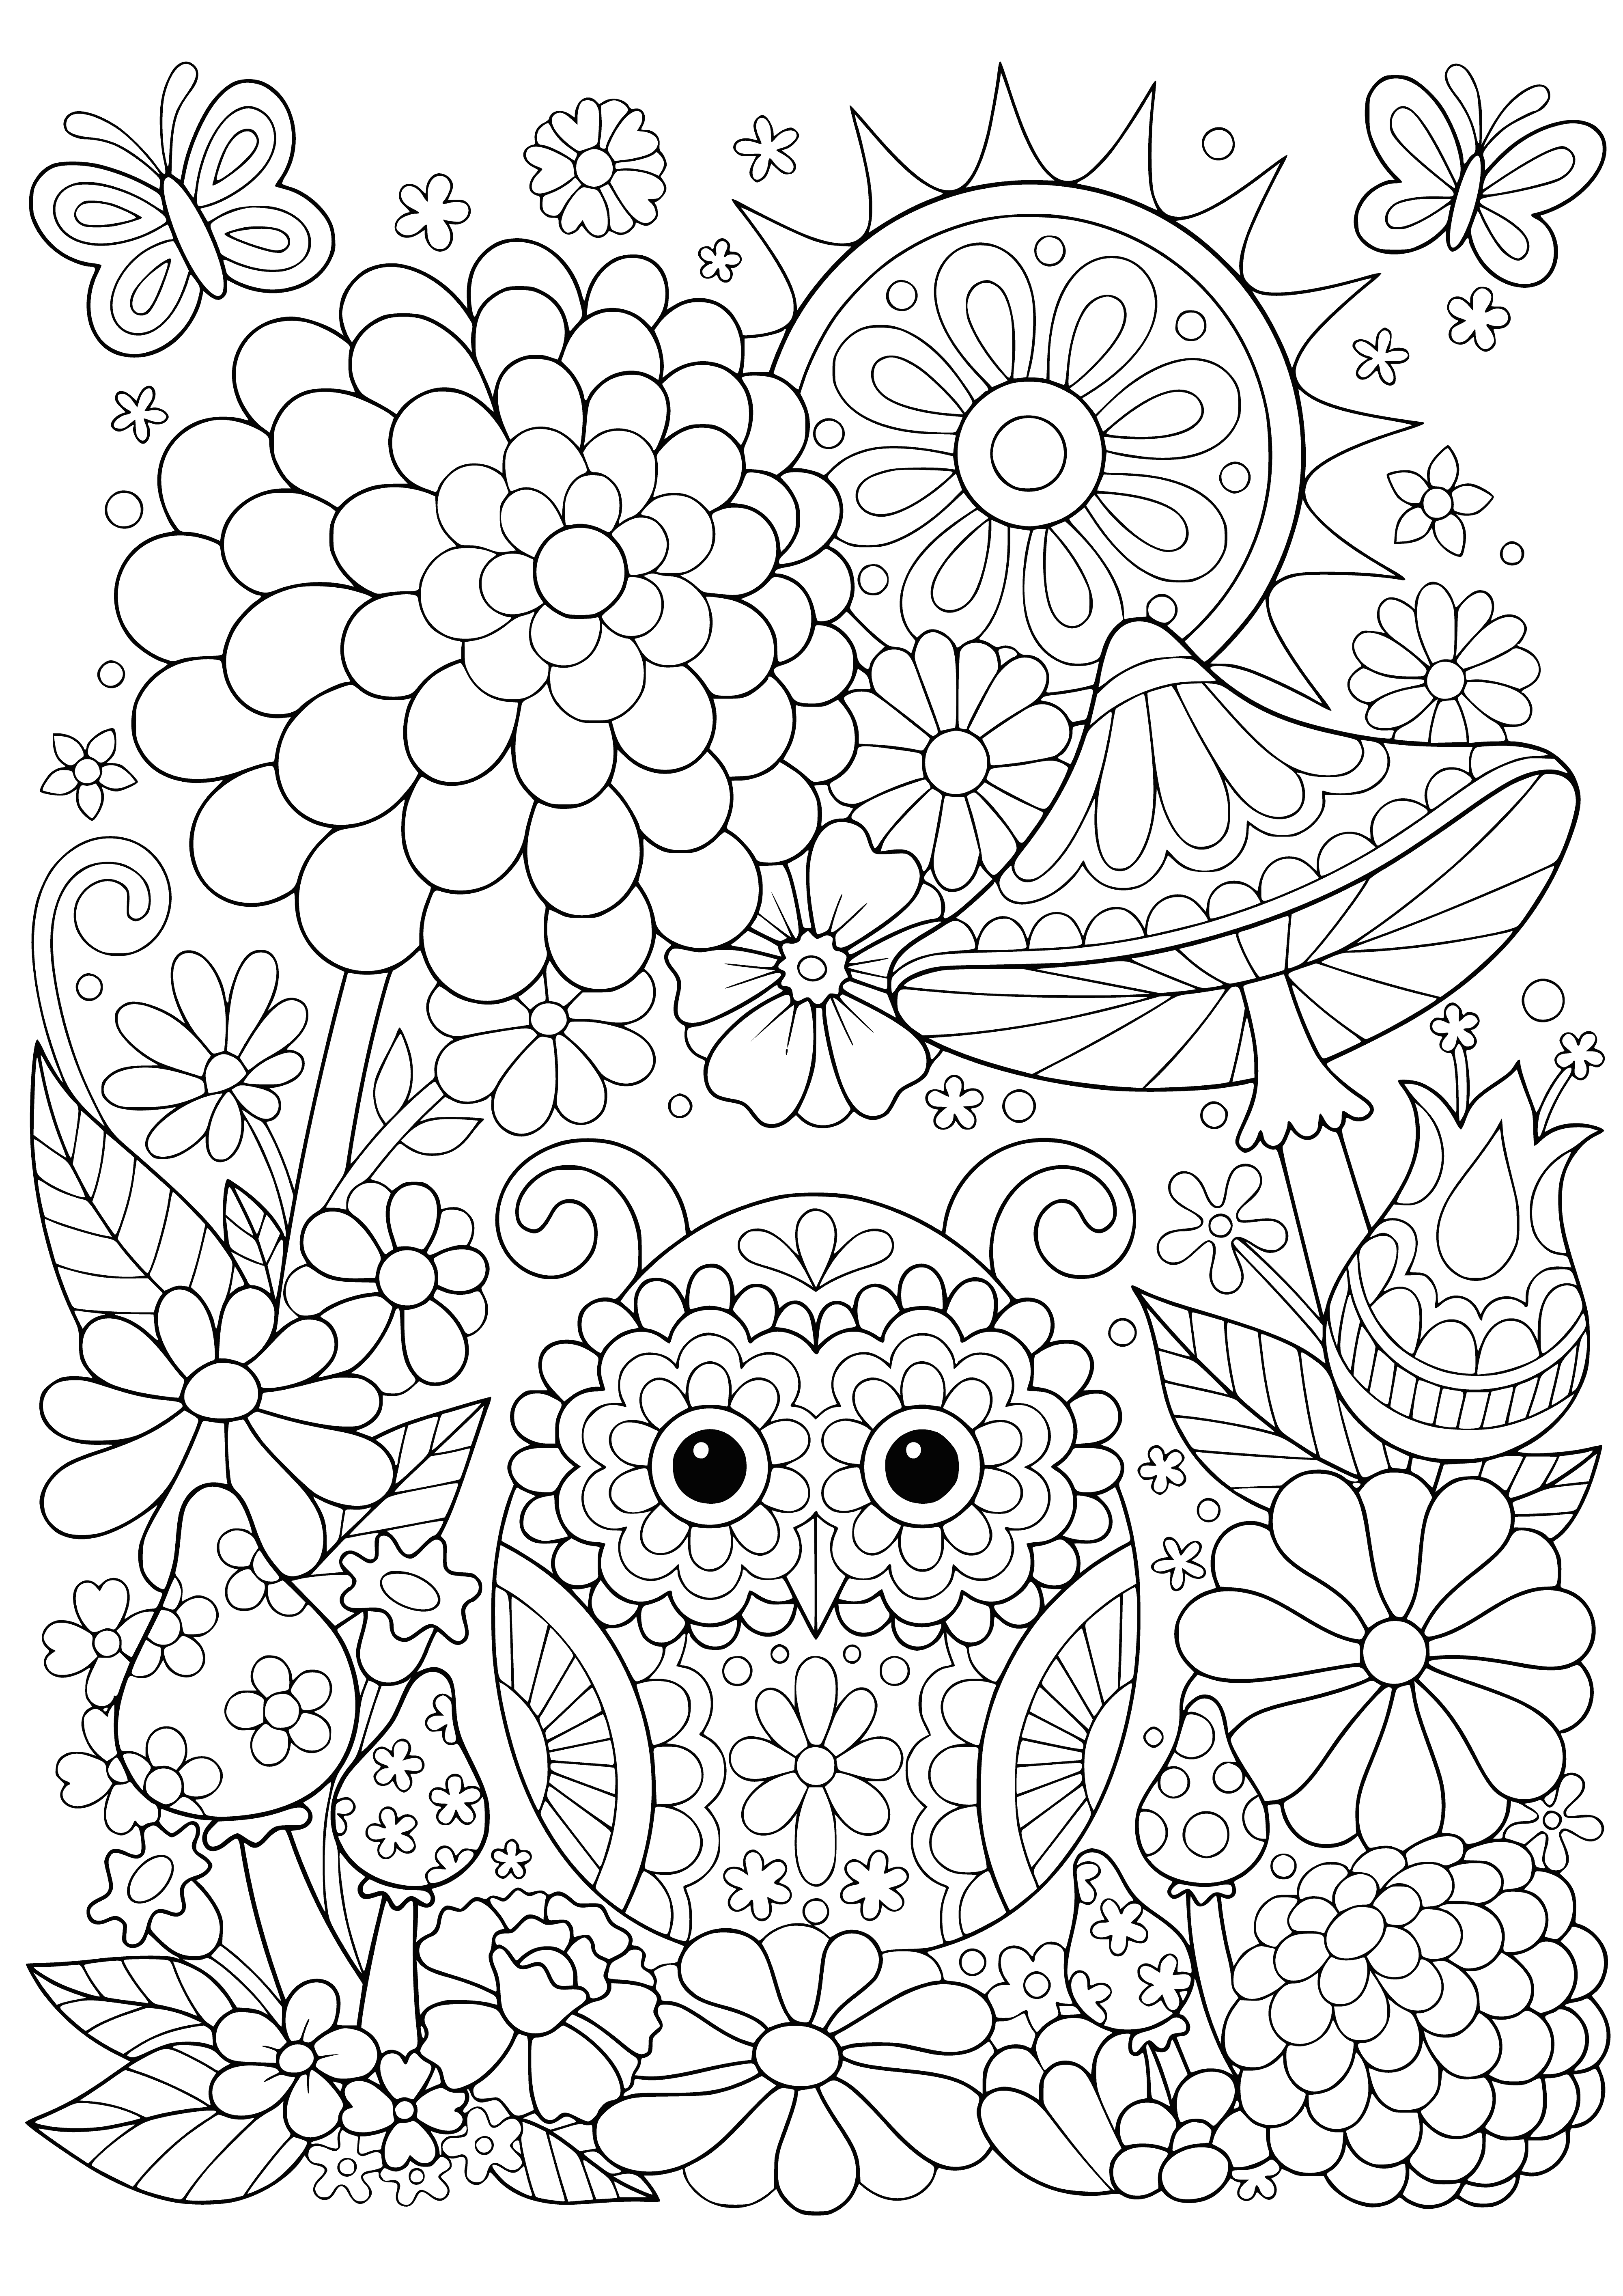 coloring page: A small owl sits in a meadow on a log, with big, round eyes and a mix of brown and white plumage. It looks content in the sun, enjoying the fresh air.